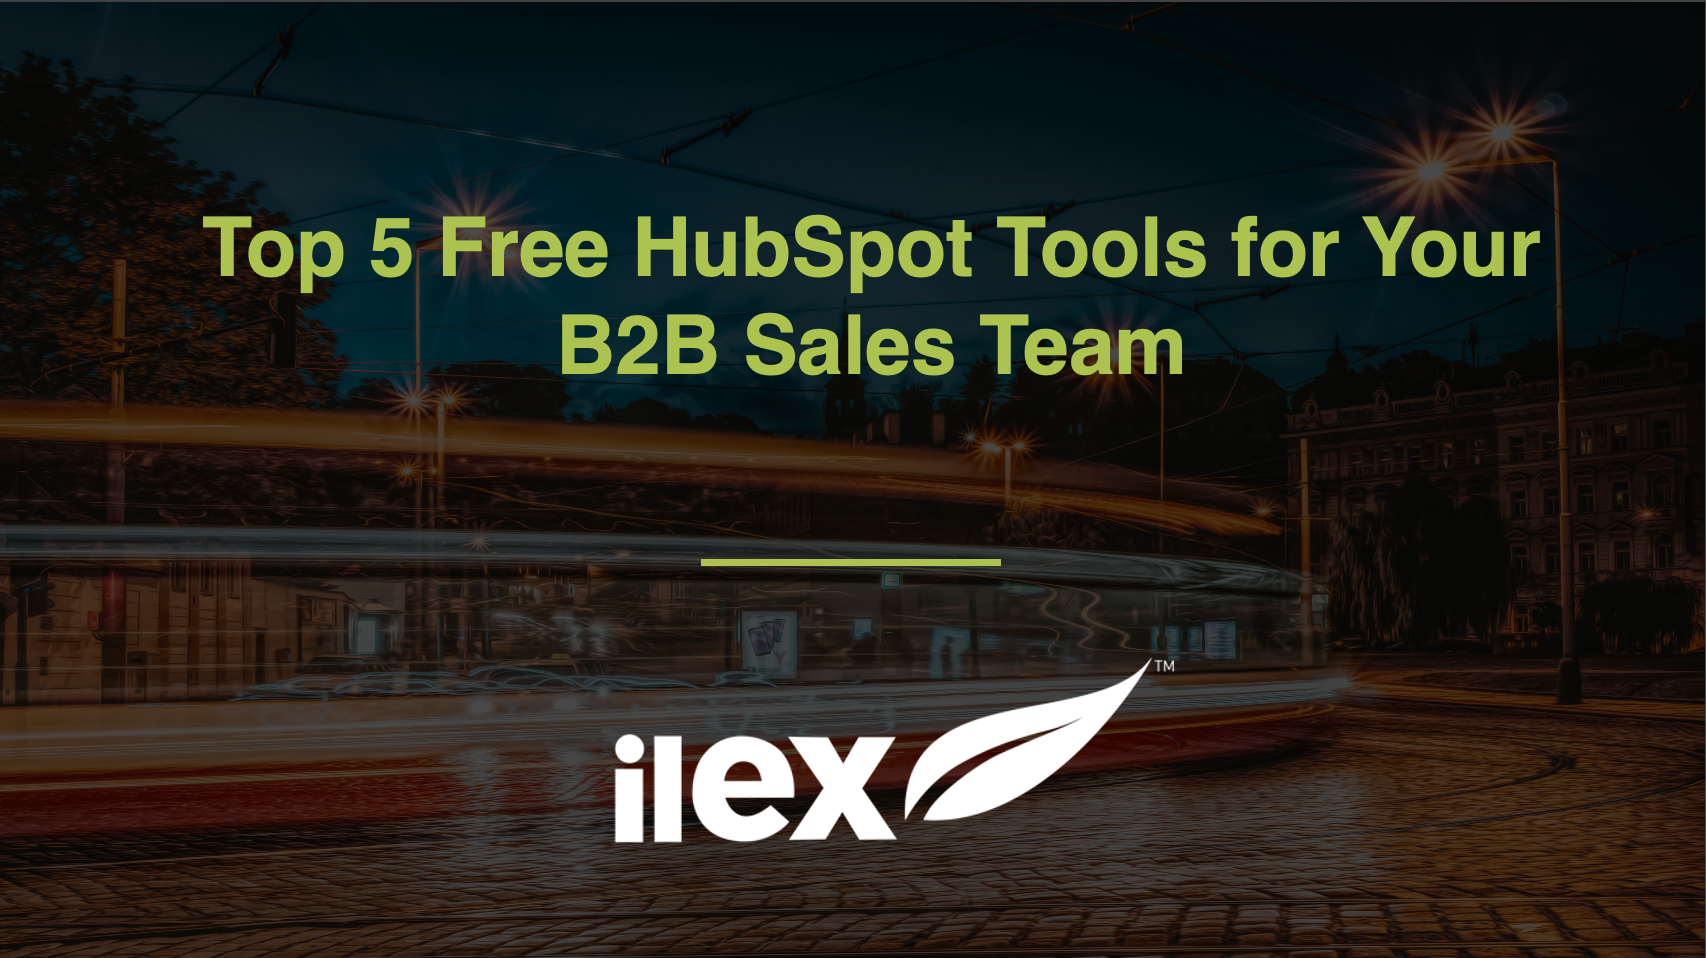 Top 5 Free HubSpot Tools for Your B2B Sales Team